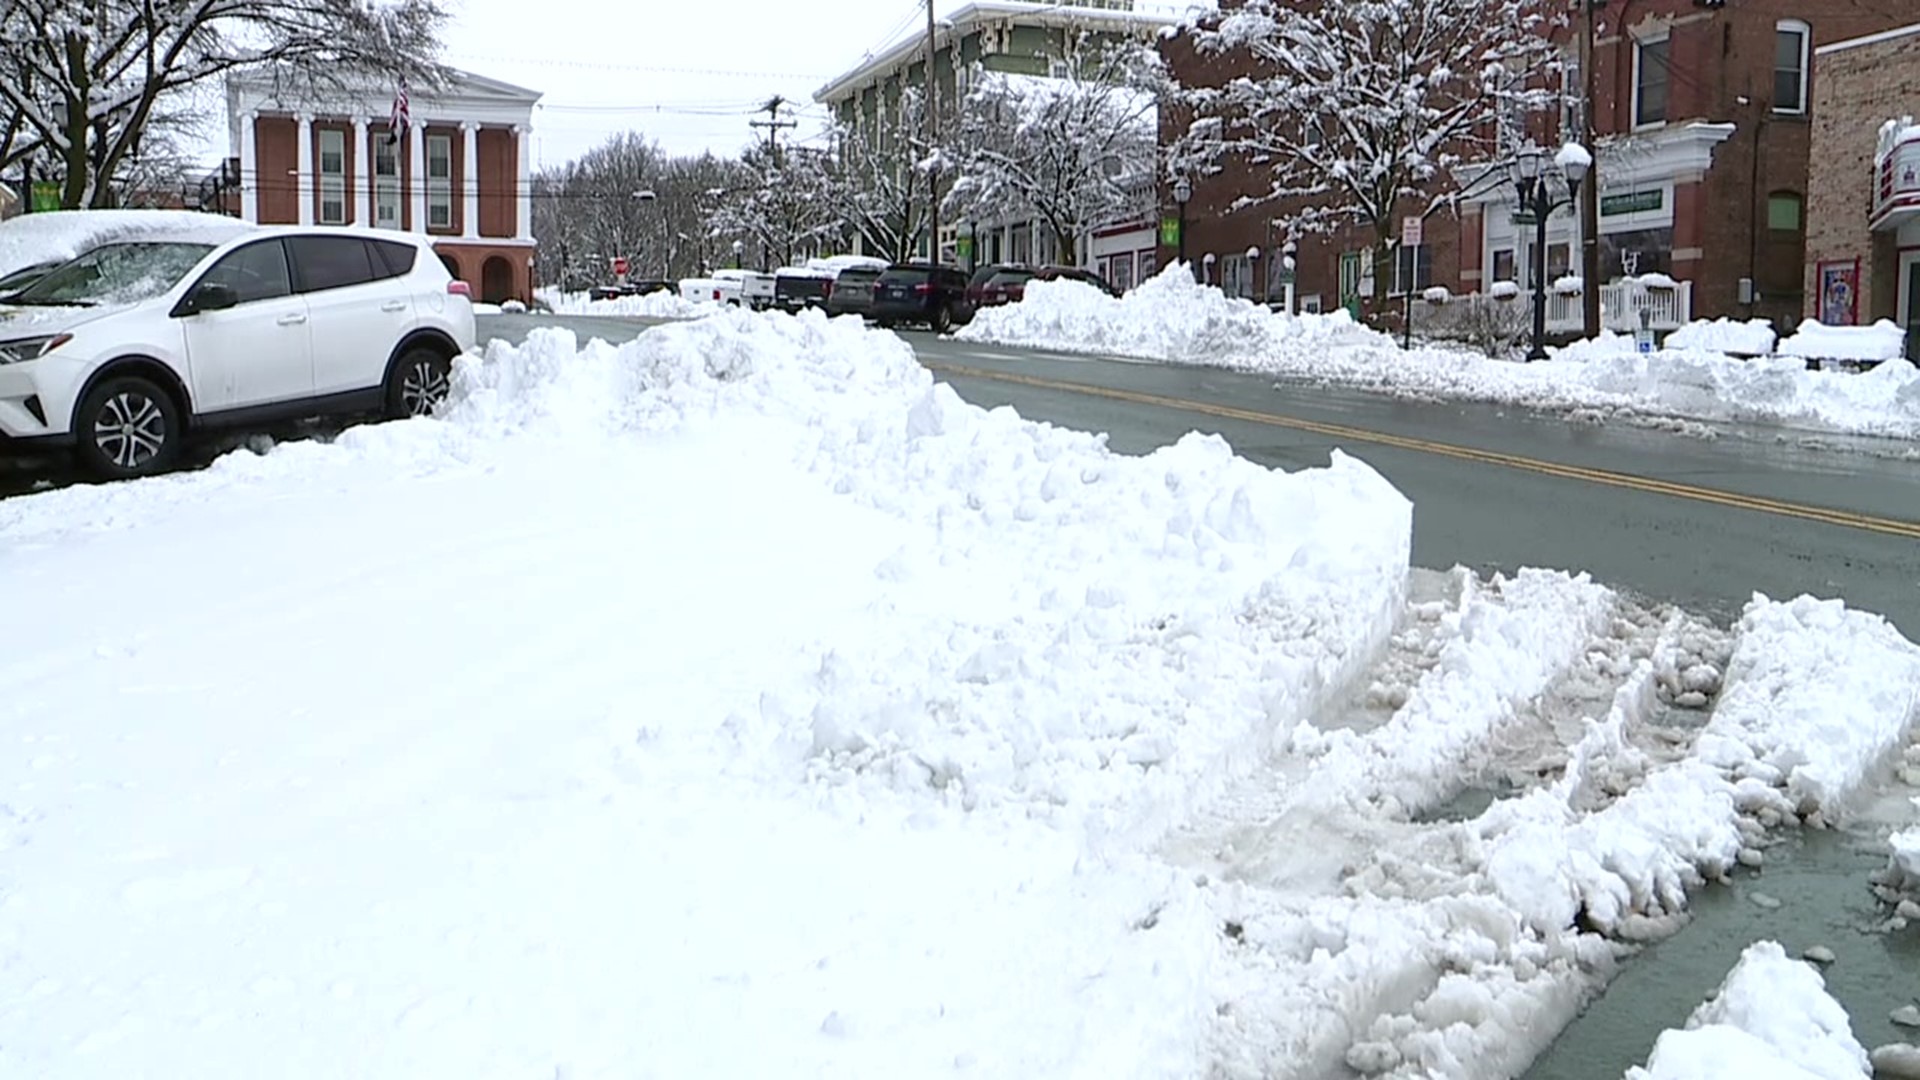 Snow overnight caused power outages for more than half of the homes and businesses in the county.